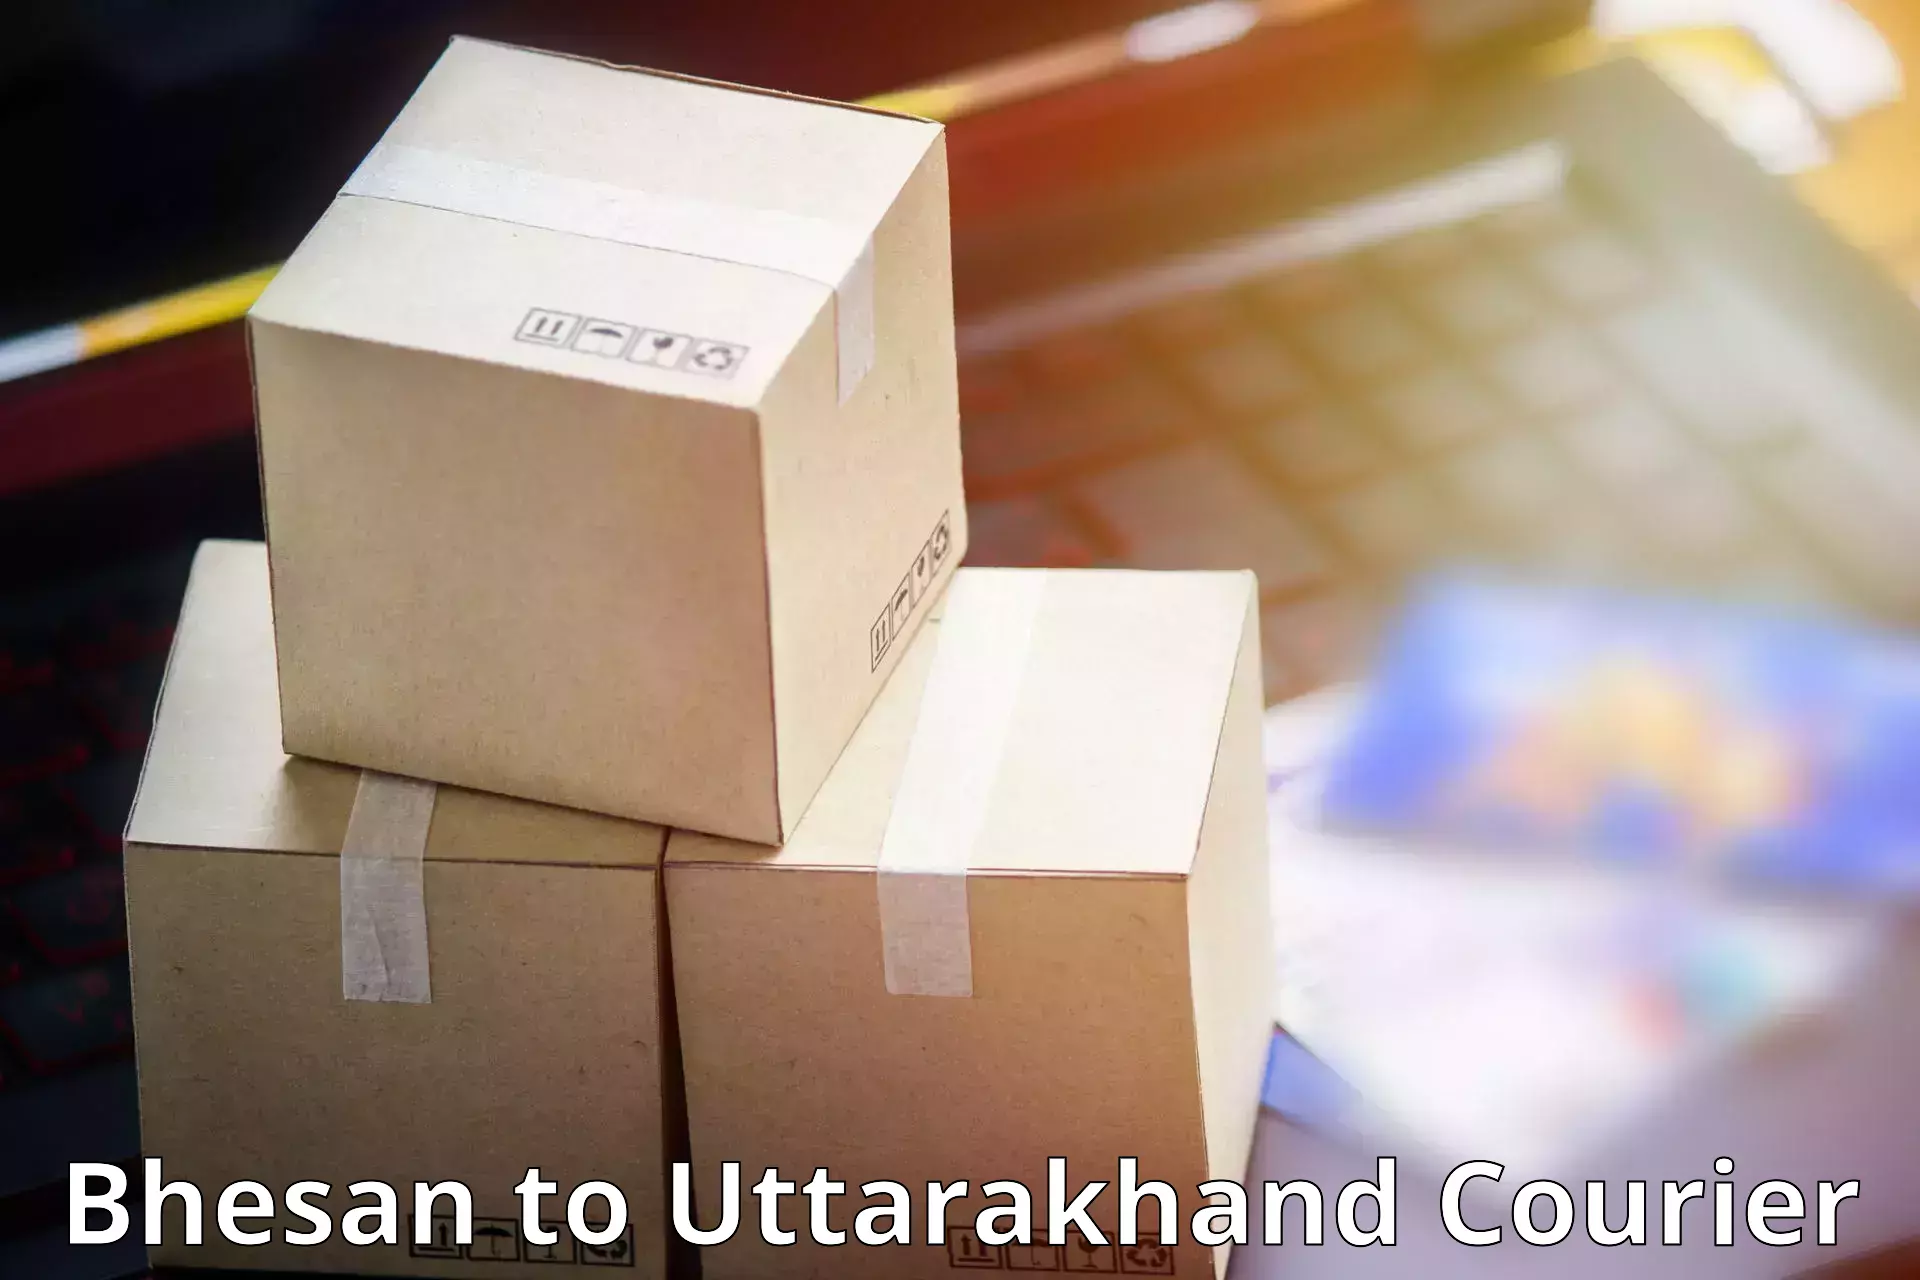 Cost-effective courier options Bhesan to Roorkee